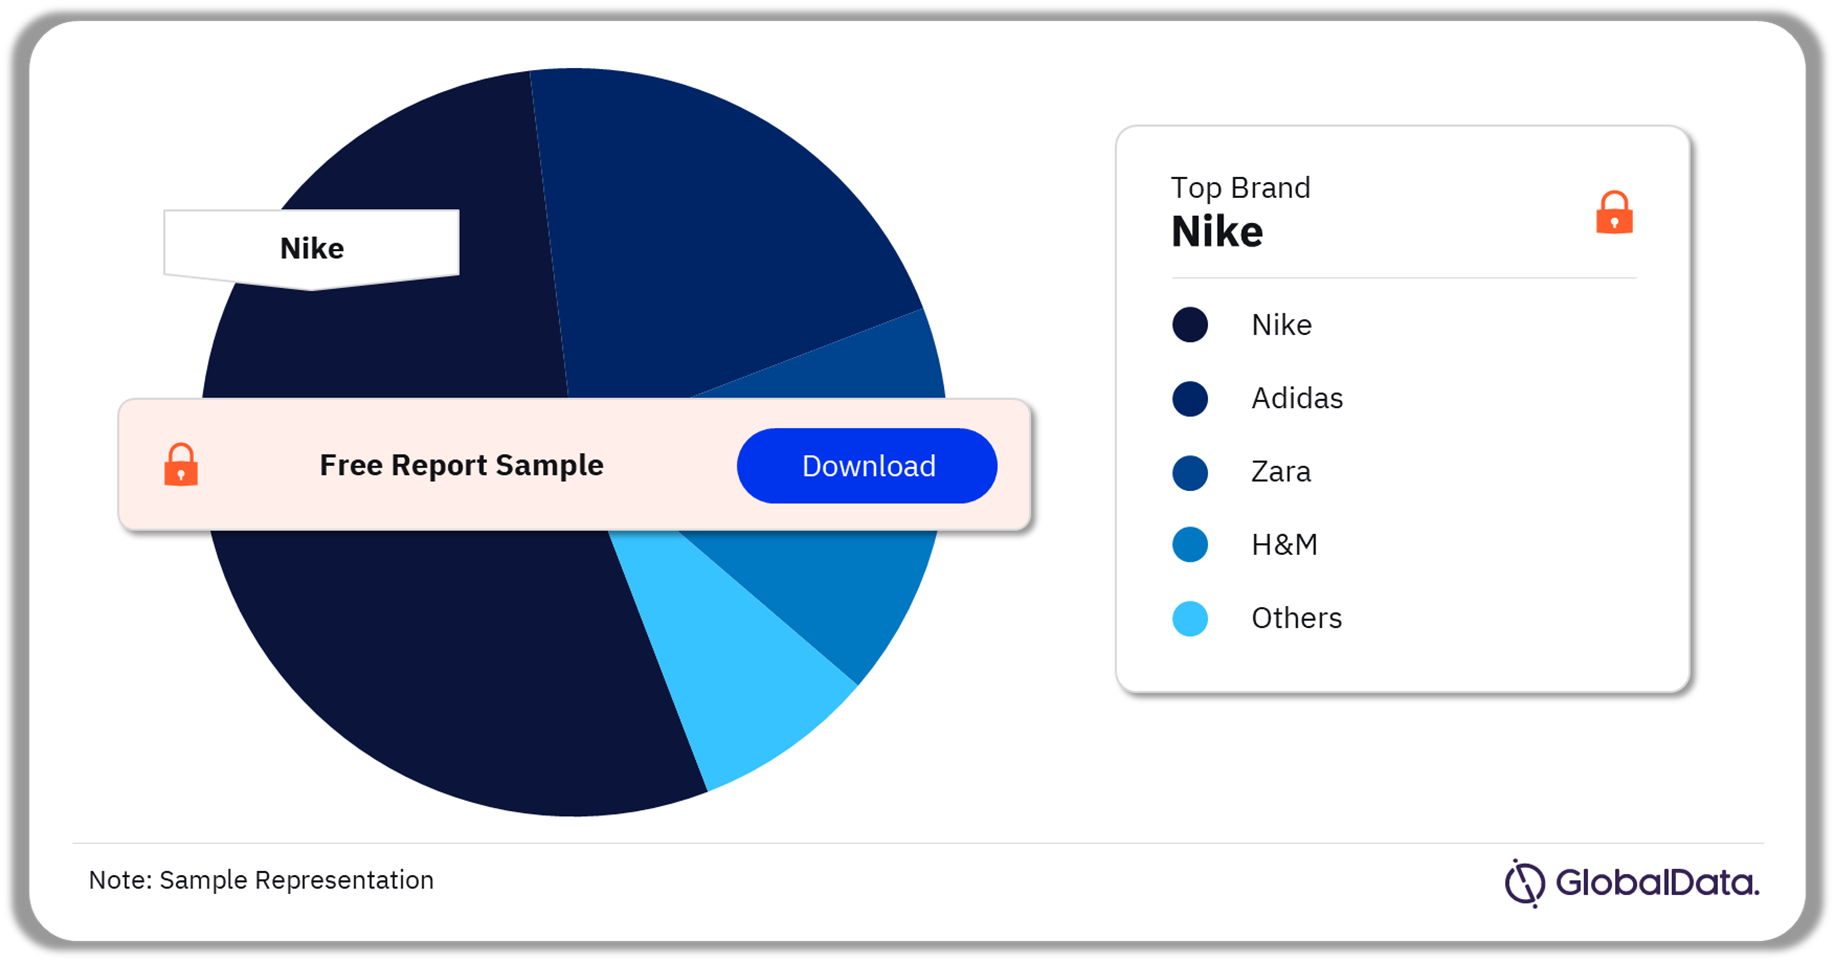  Apparel Market Analysis by Brands, 2022 (%)